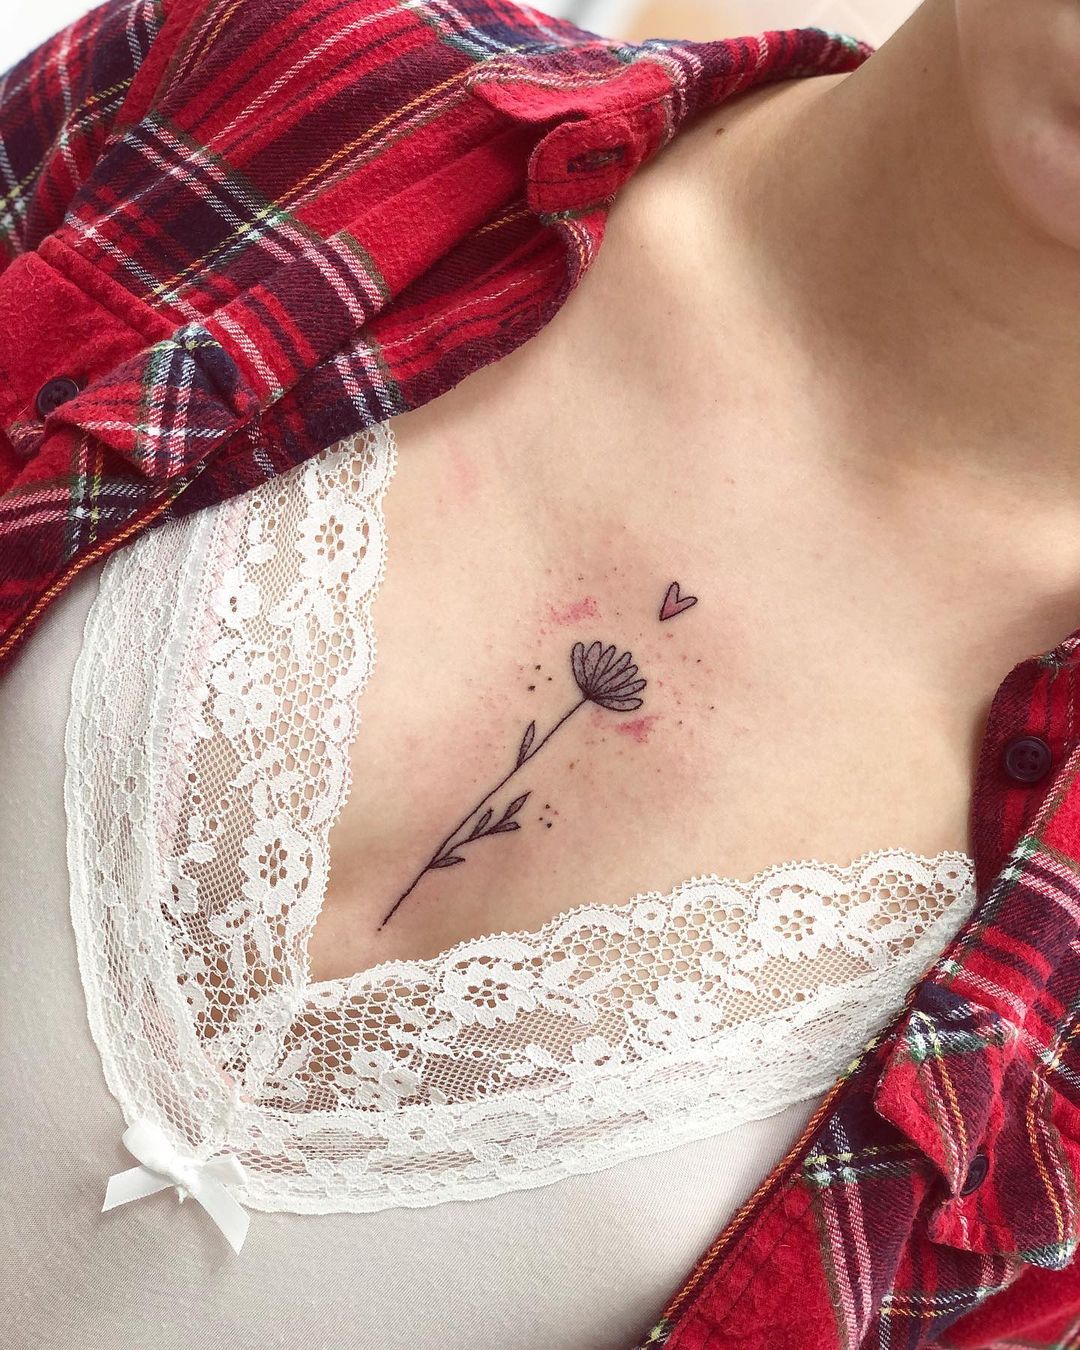 15 Irresistible Sexy Breast Tattoos for Women - wormholetattoo's blog